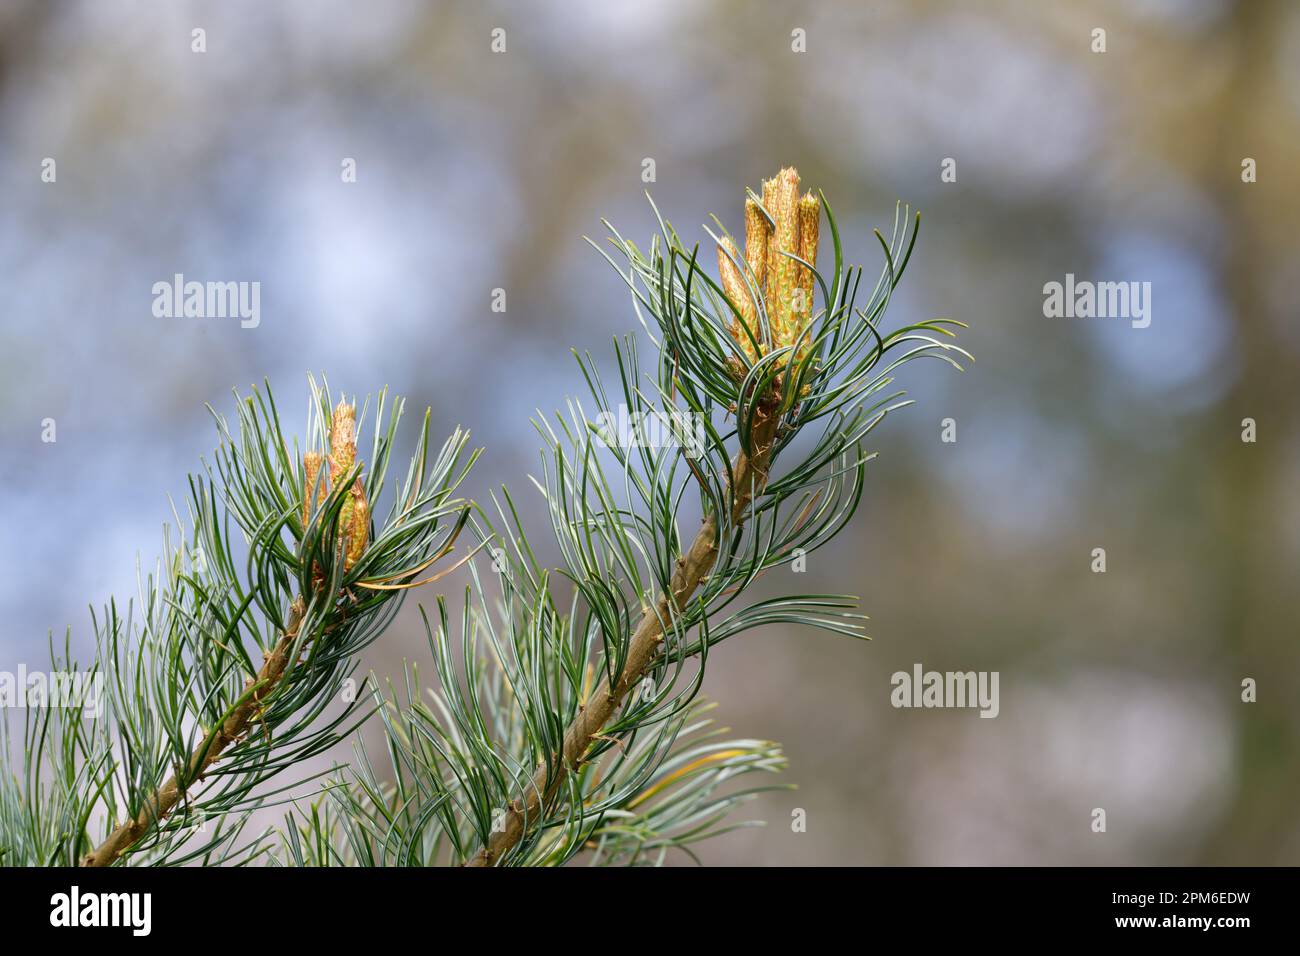 young pine cones on a branch in spring Stock Photo